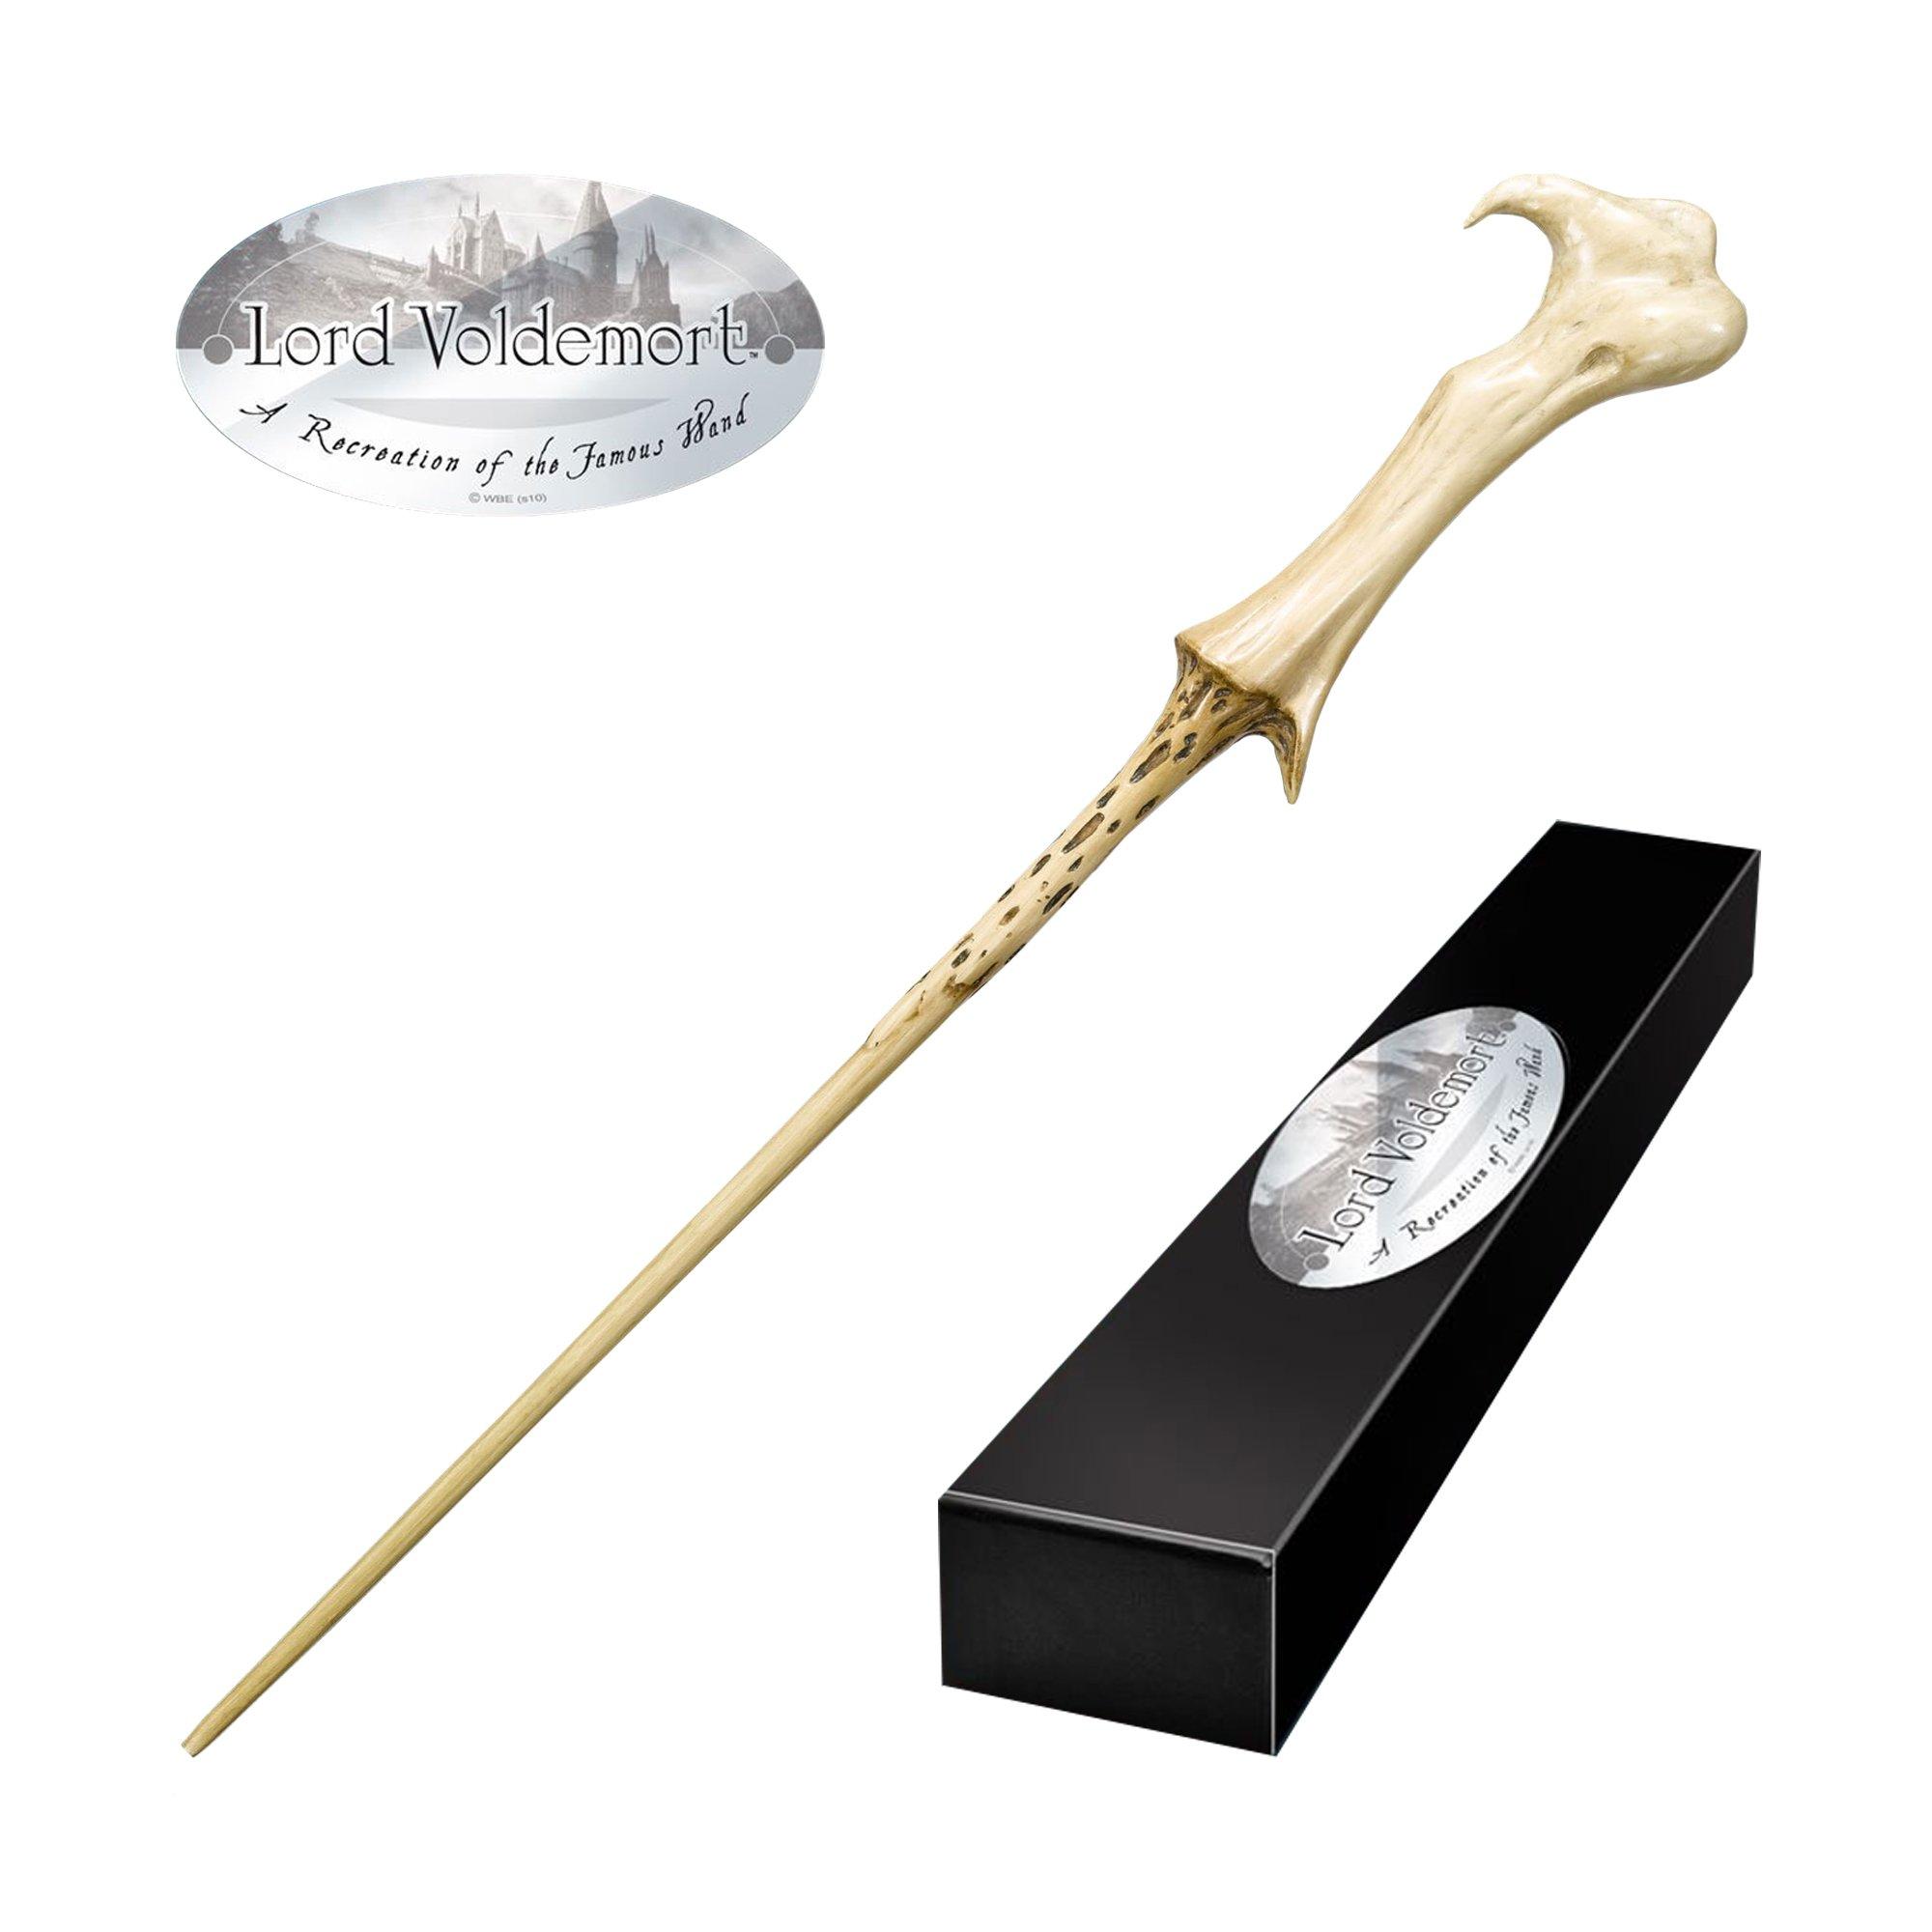 Image of Noble Collection Harry Potter Zauberstab Lord Voldemort